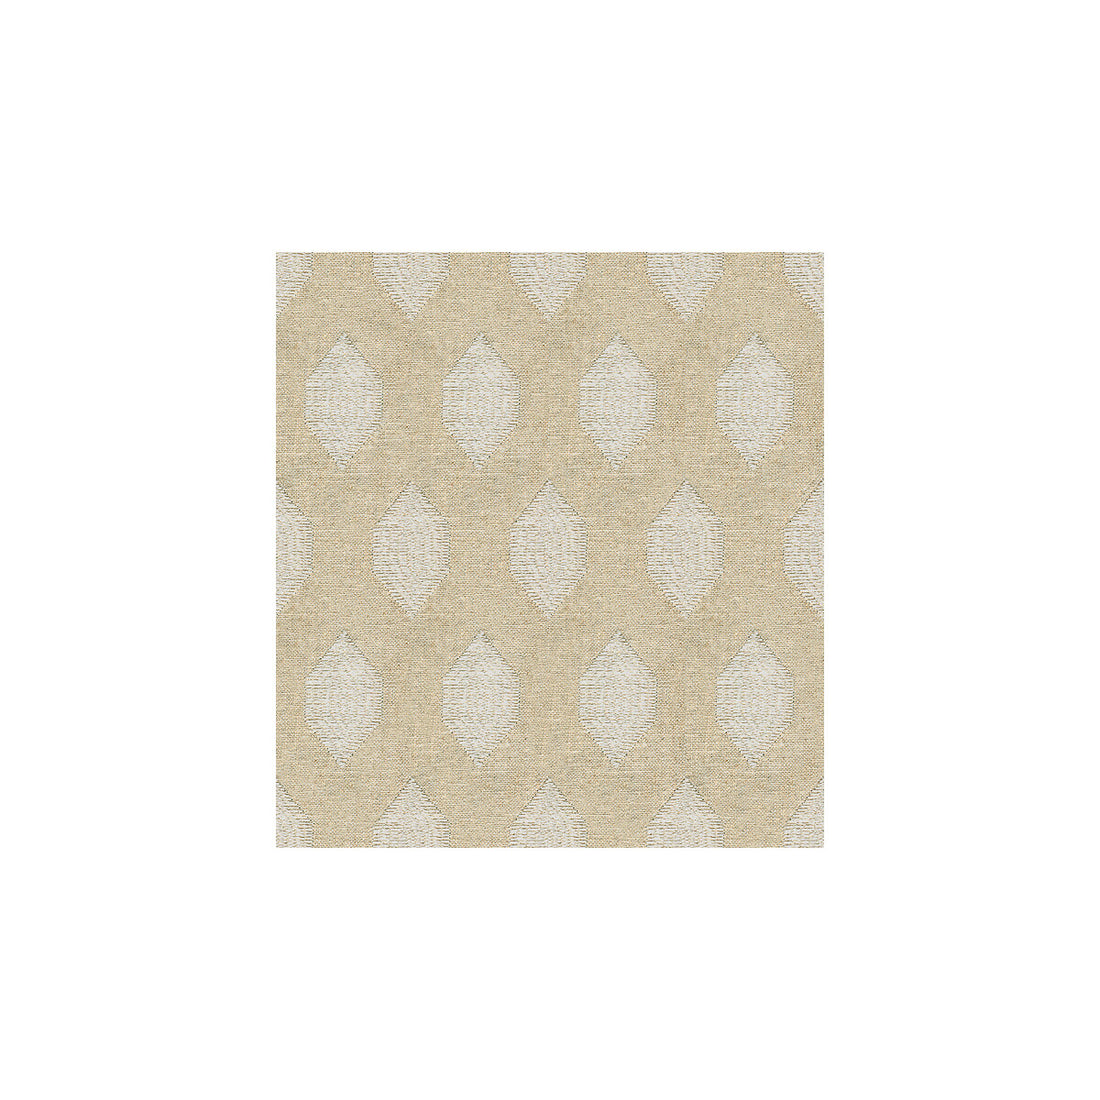 Kravet Design fabric in 33145-16 color - pattern 33145.16.0 - by Kravet Design in the Echo Heirloom India collection